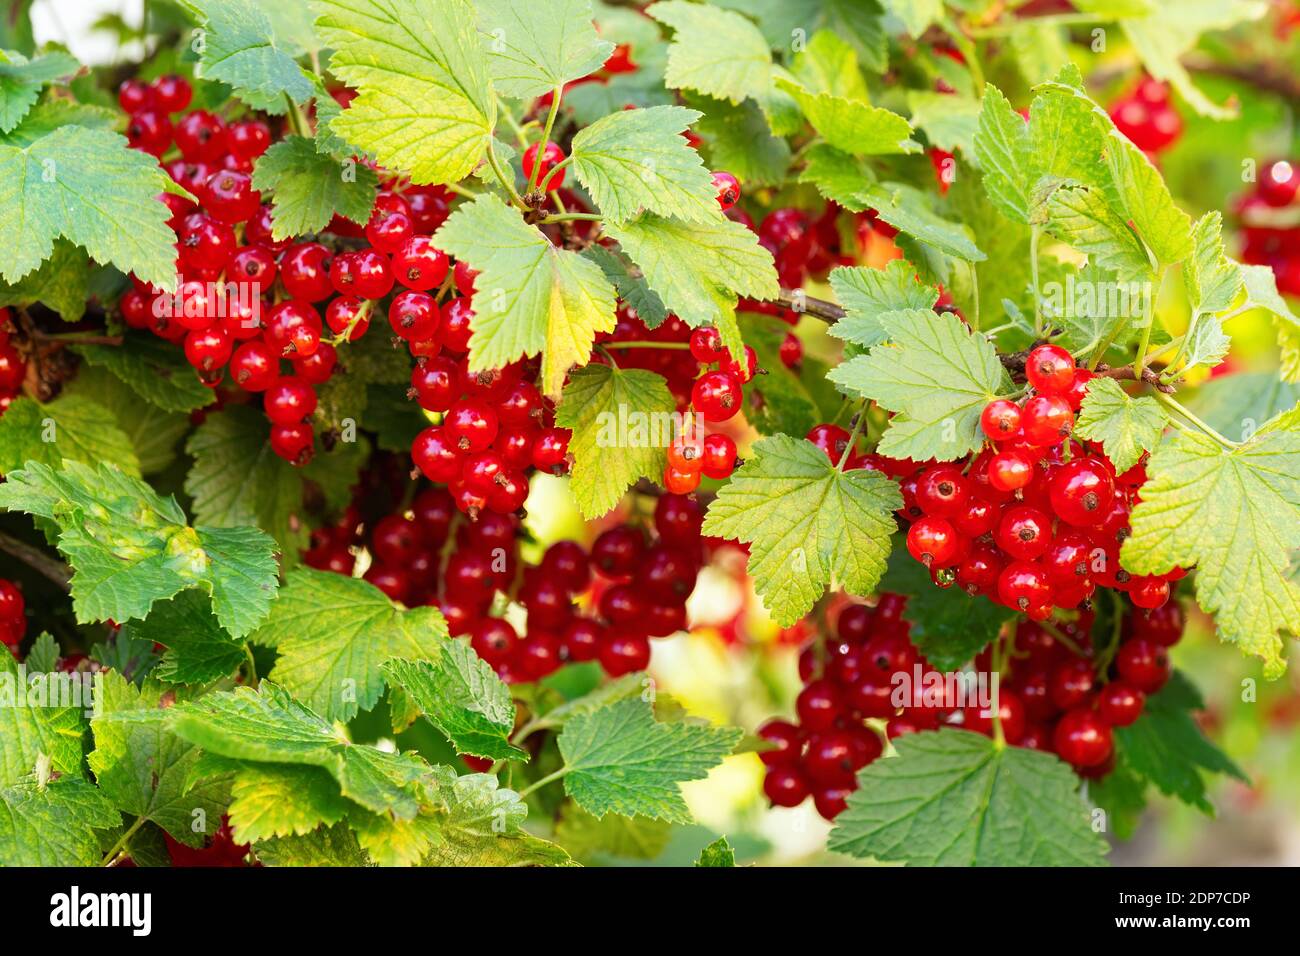 Ripe red currants (Ribes rubrum) in homemade garden. Fresh bunch of natural fruit growing on branch on farm. Close-up. Organic farming, healthy food, Stock Photo